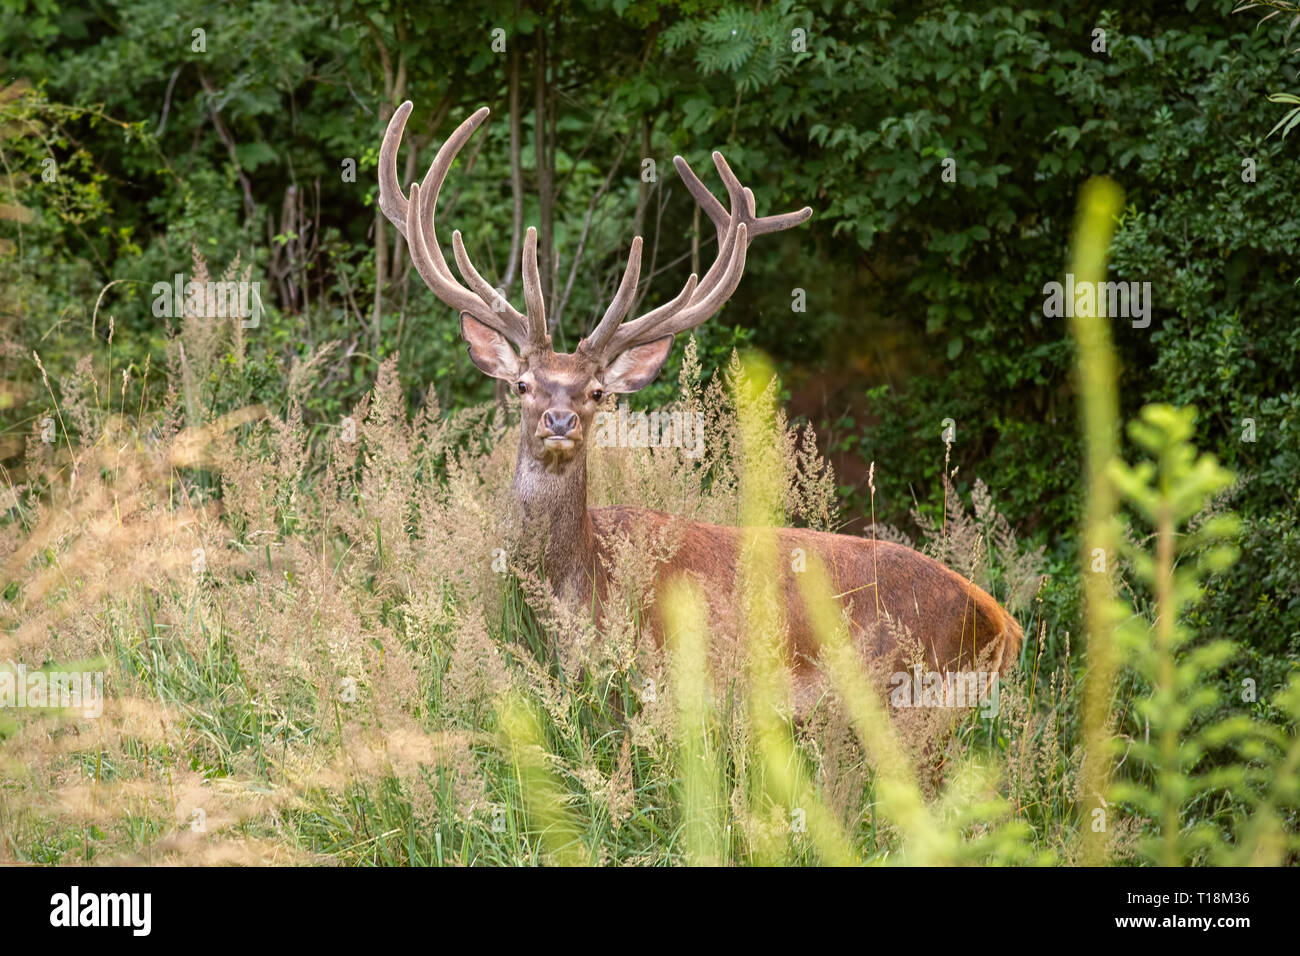 Red deer stag with big antlers in velvet in young forest Stock Photo